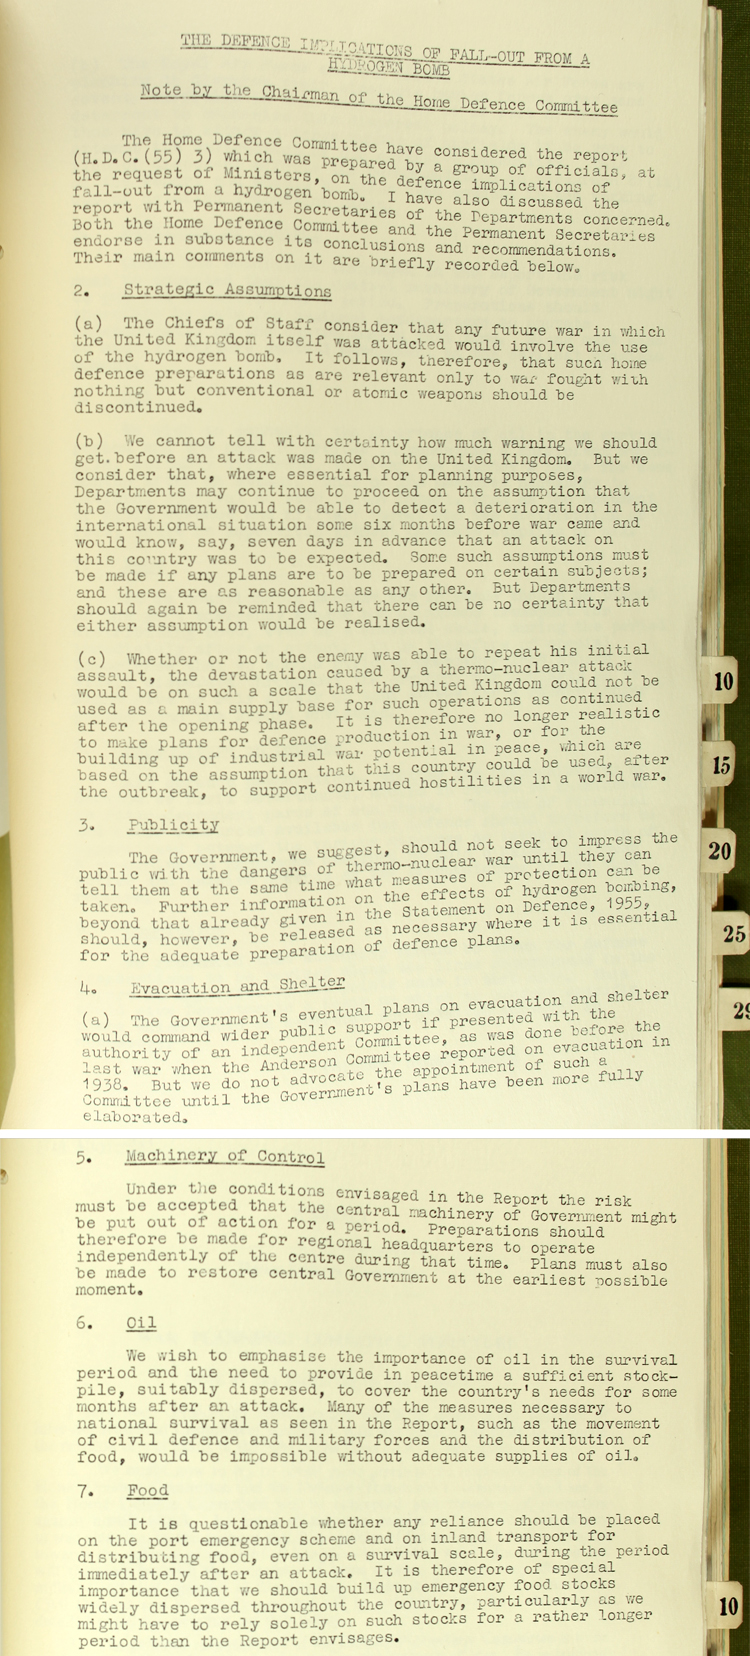 Summary of comments on a report outlining the defence implications of a Hydrogen Bomb attack recorded by Norman Brook at the Cabinet Office, 25th March, 1955 (CAB 134/940)